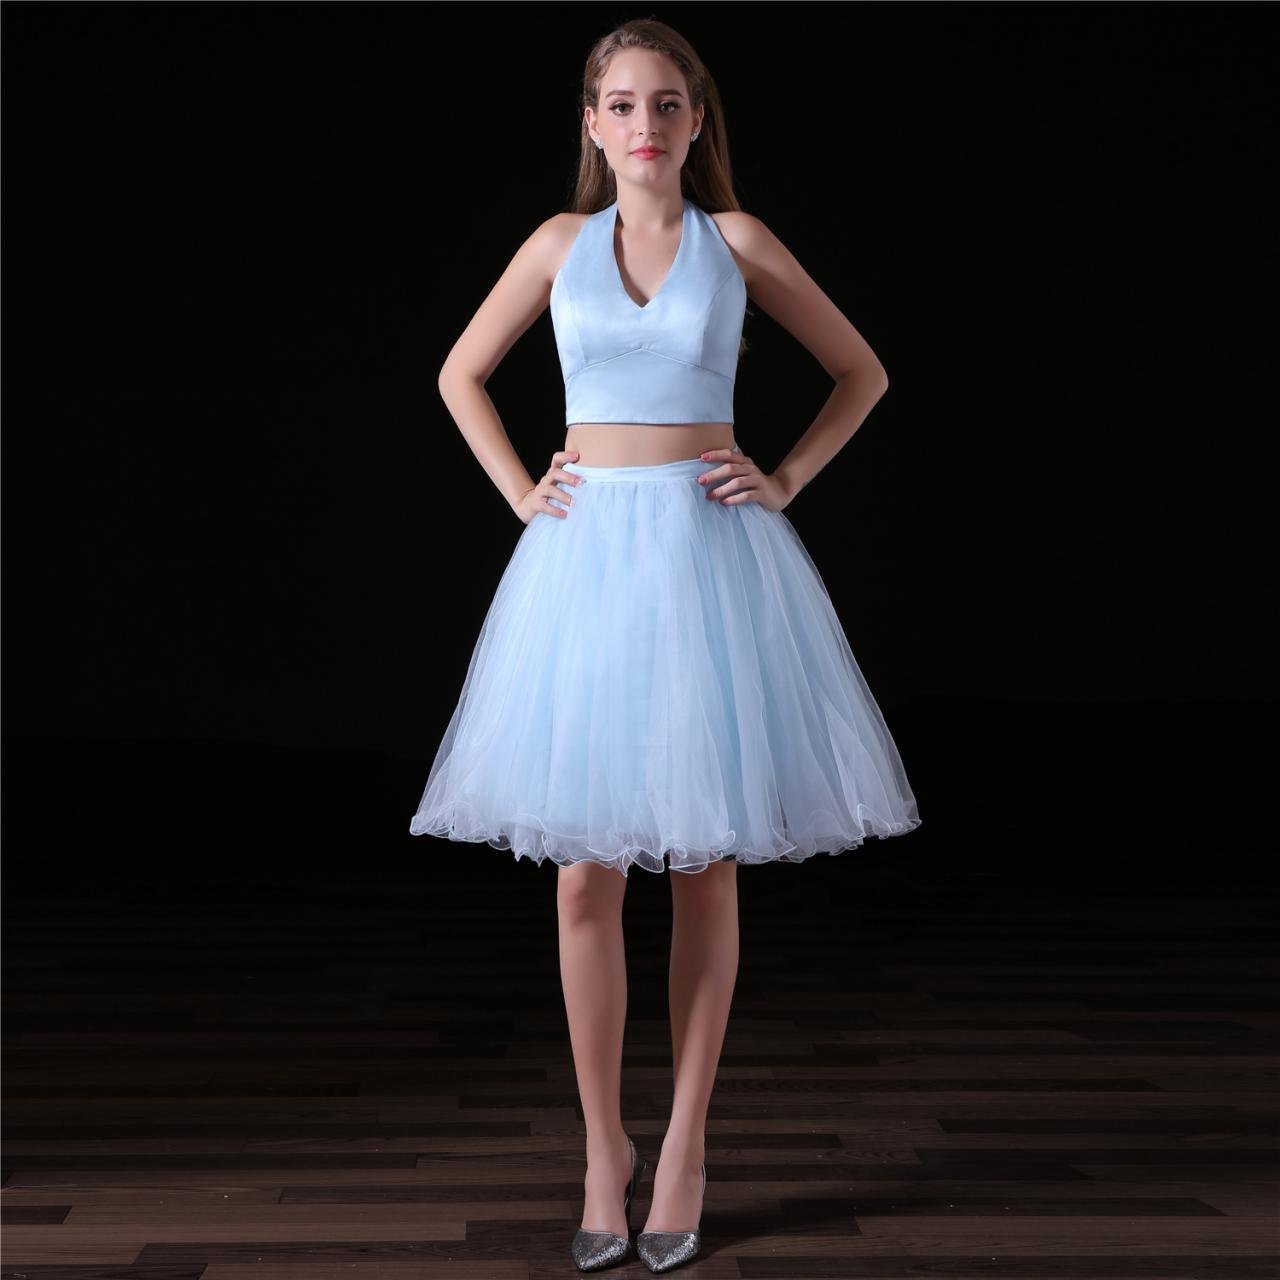 Two Piece Light Blue Homecoming Dresses With Satin Halter Neckline And Organza Ruffle Skirt